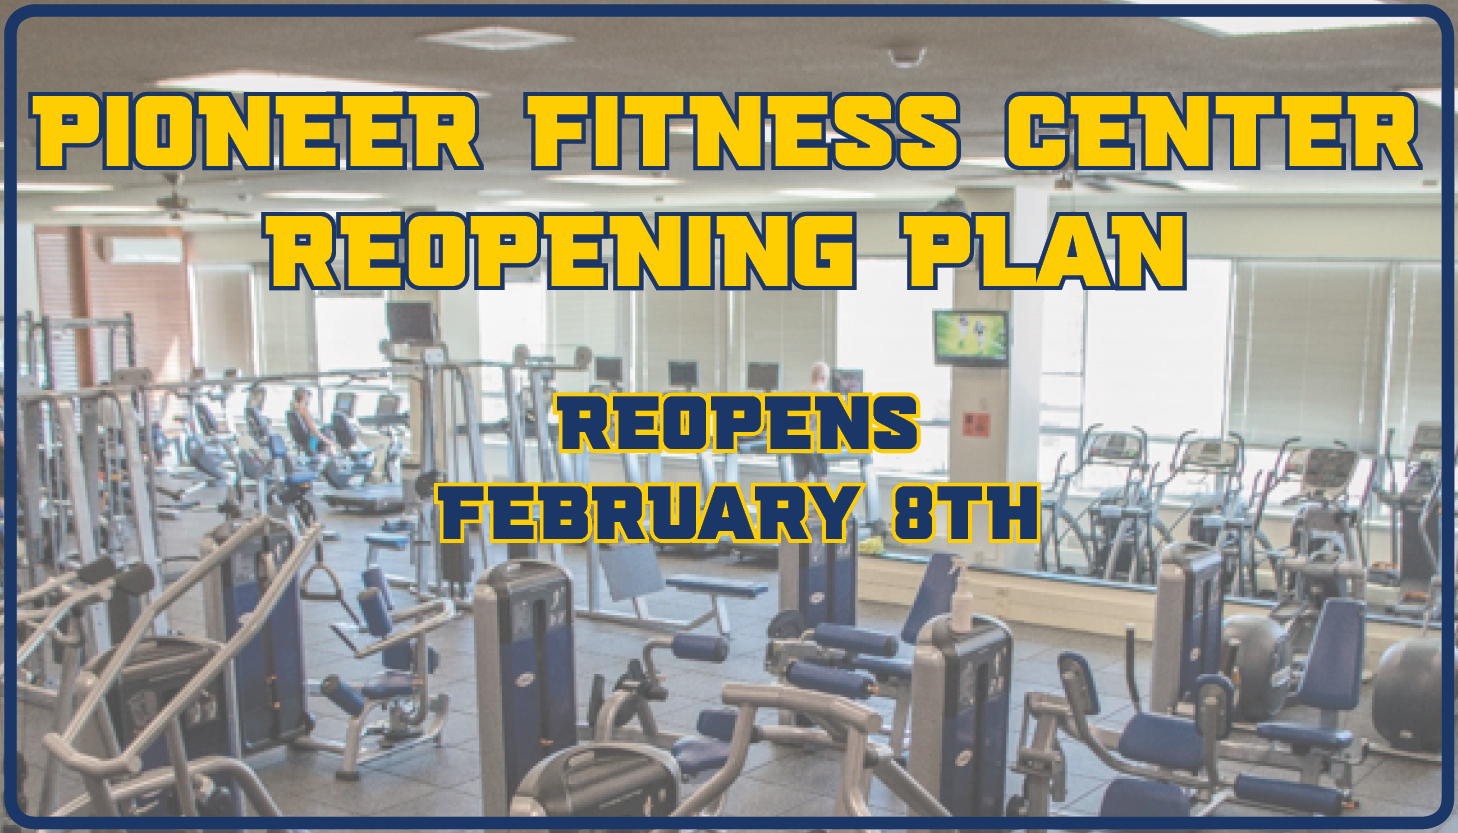 Pioneer Fitness Center Reopening Plan - picture features older image of the facility.